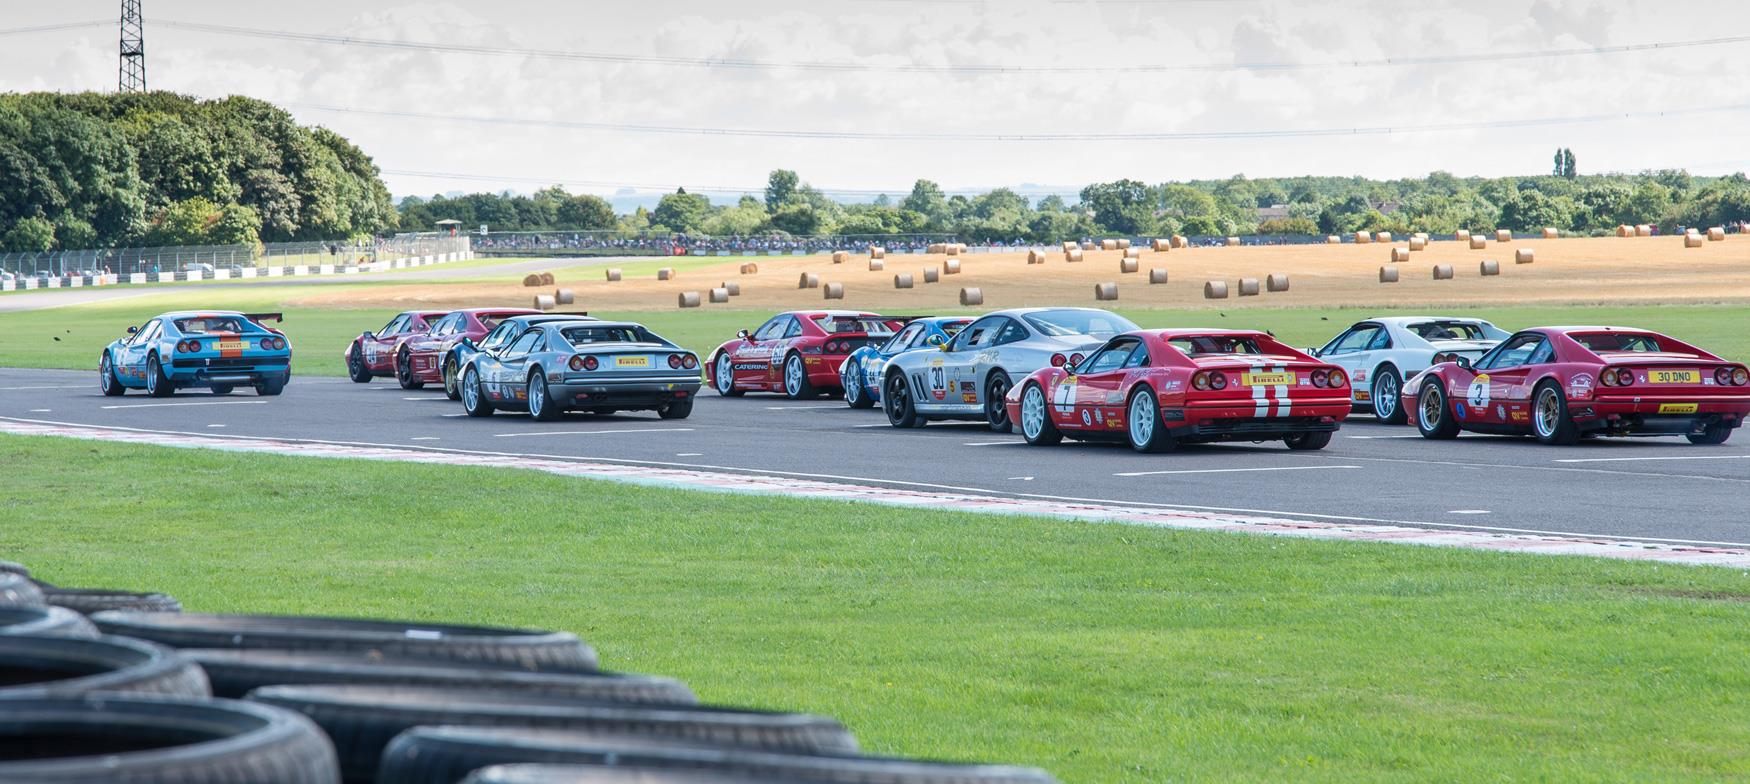 Feel the Need for Speed at Castle Combe Circuit